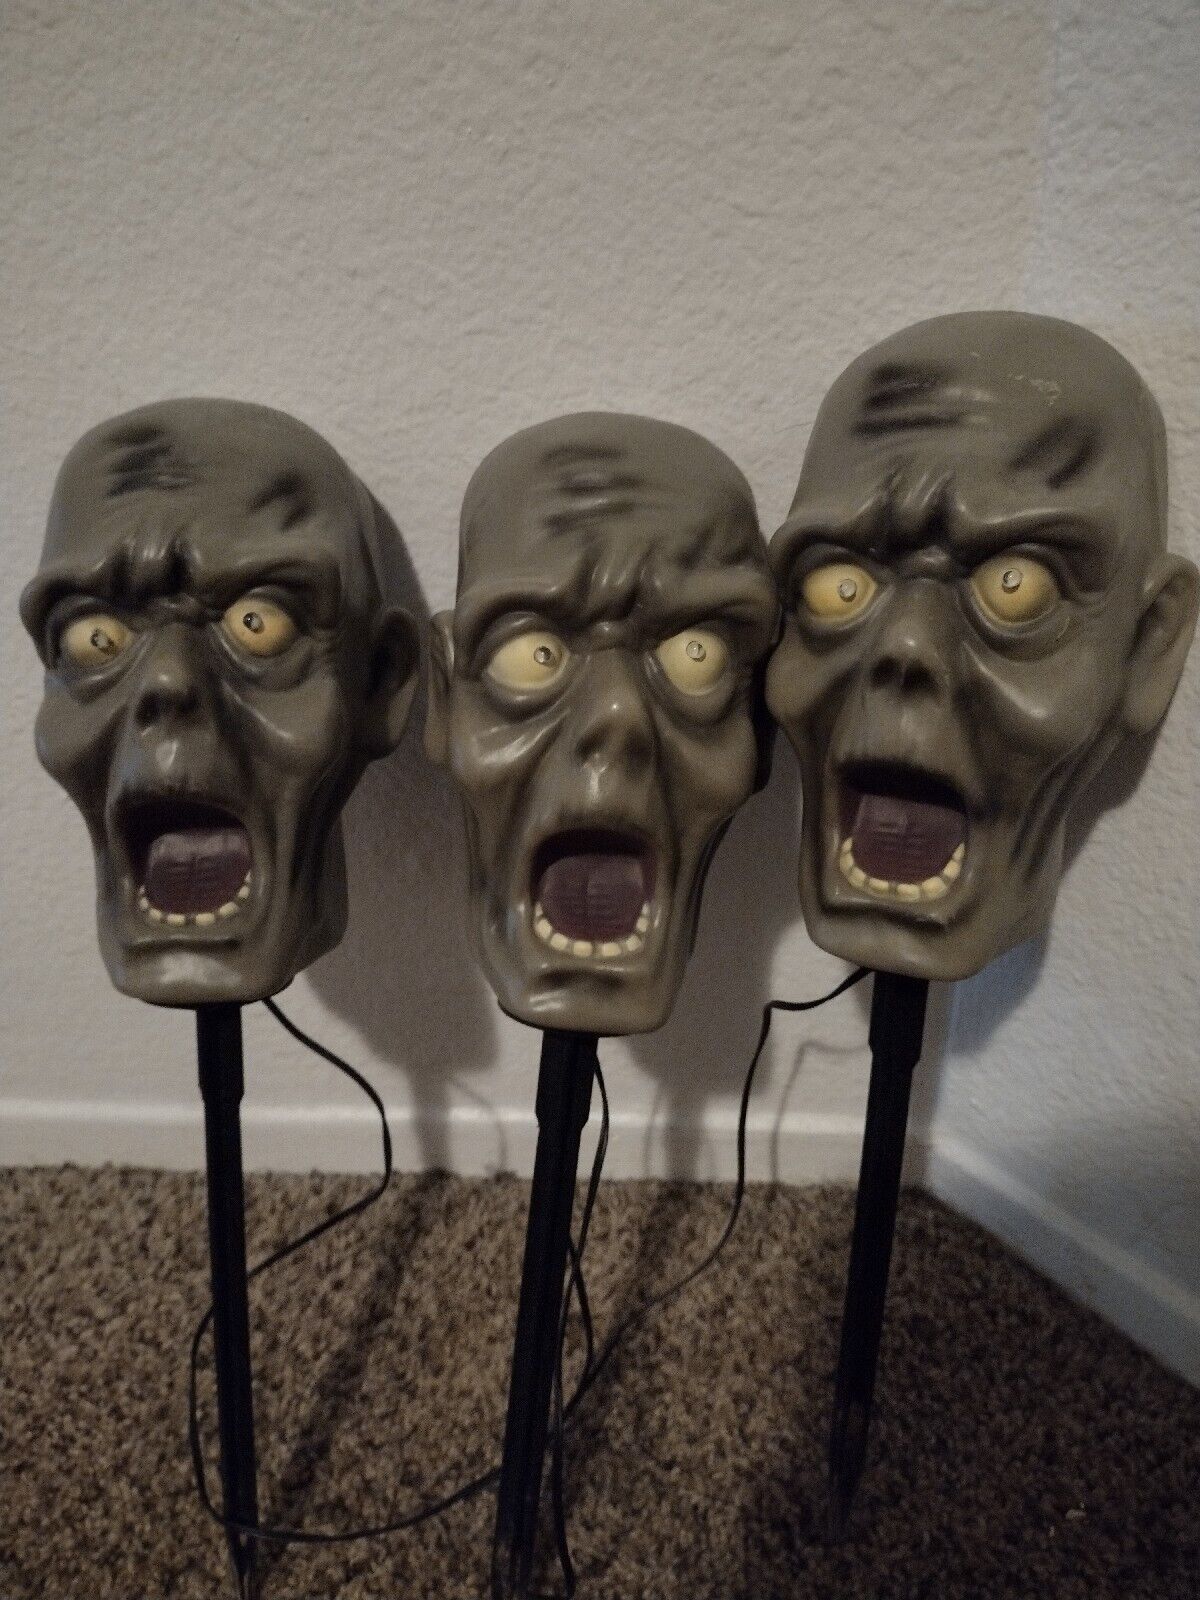 2010 Magic Power Co Set of 3 Zombie 3 skulls Sound Activated Tested & Working